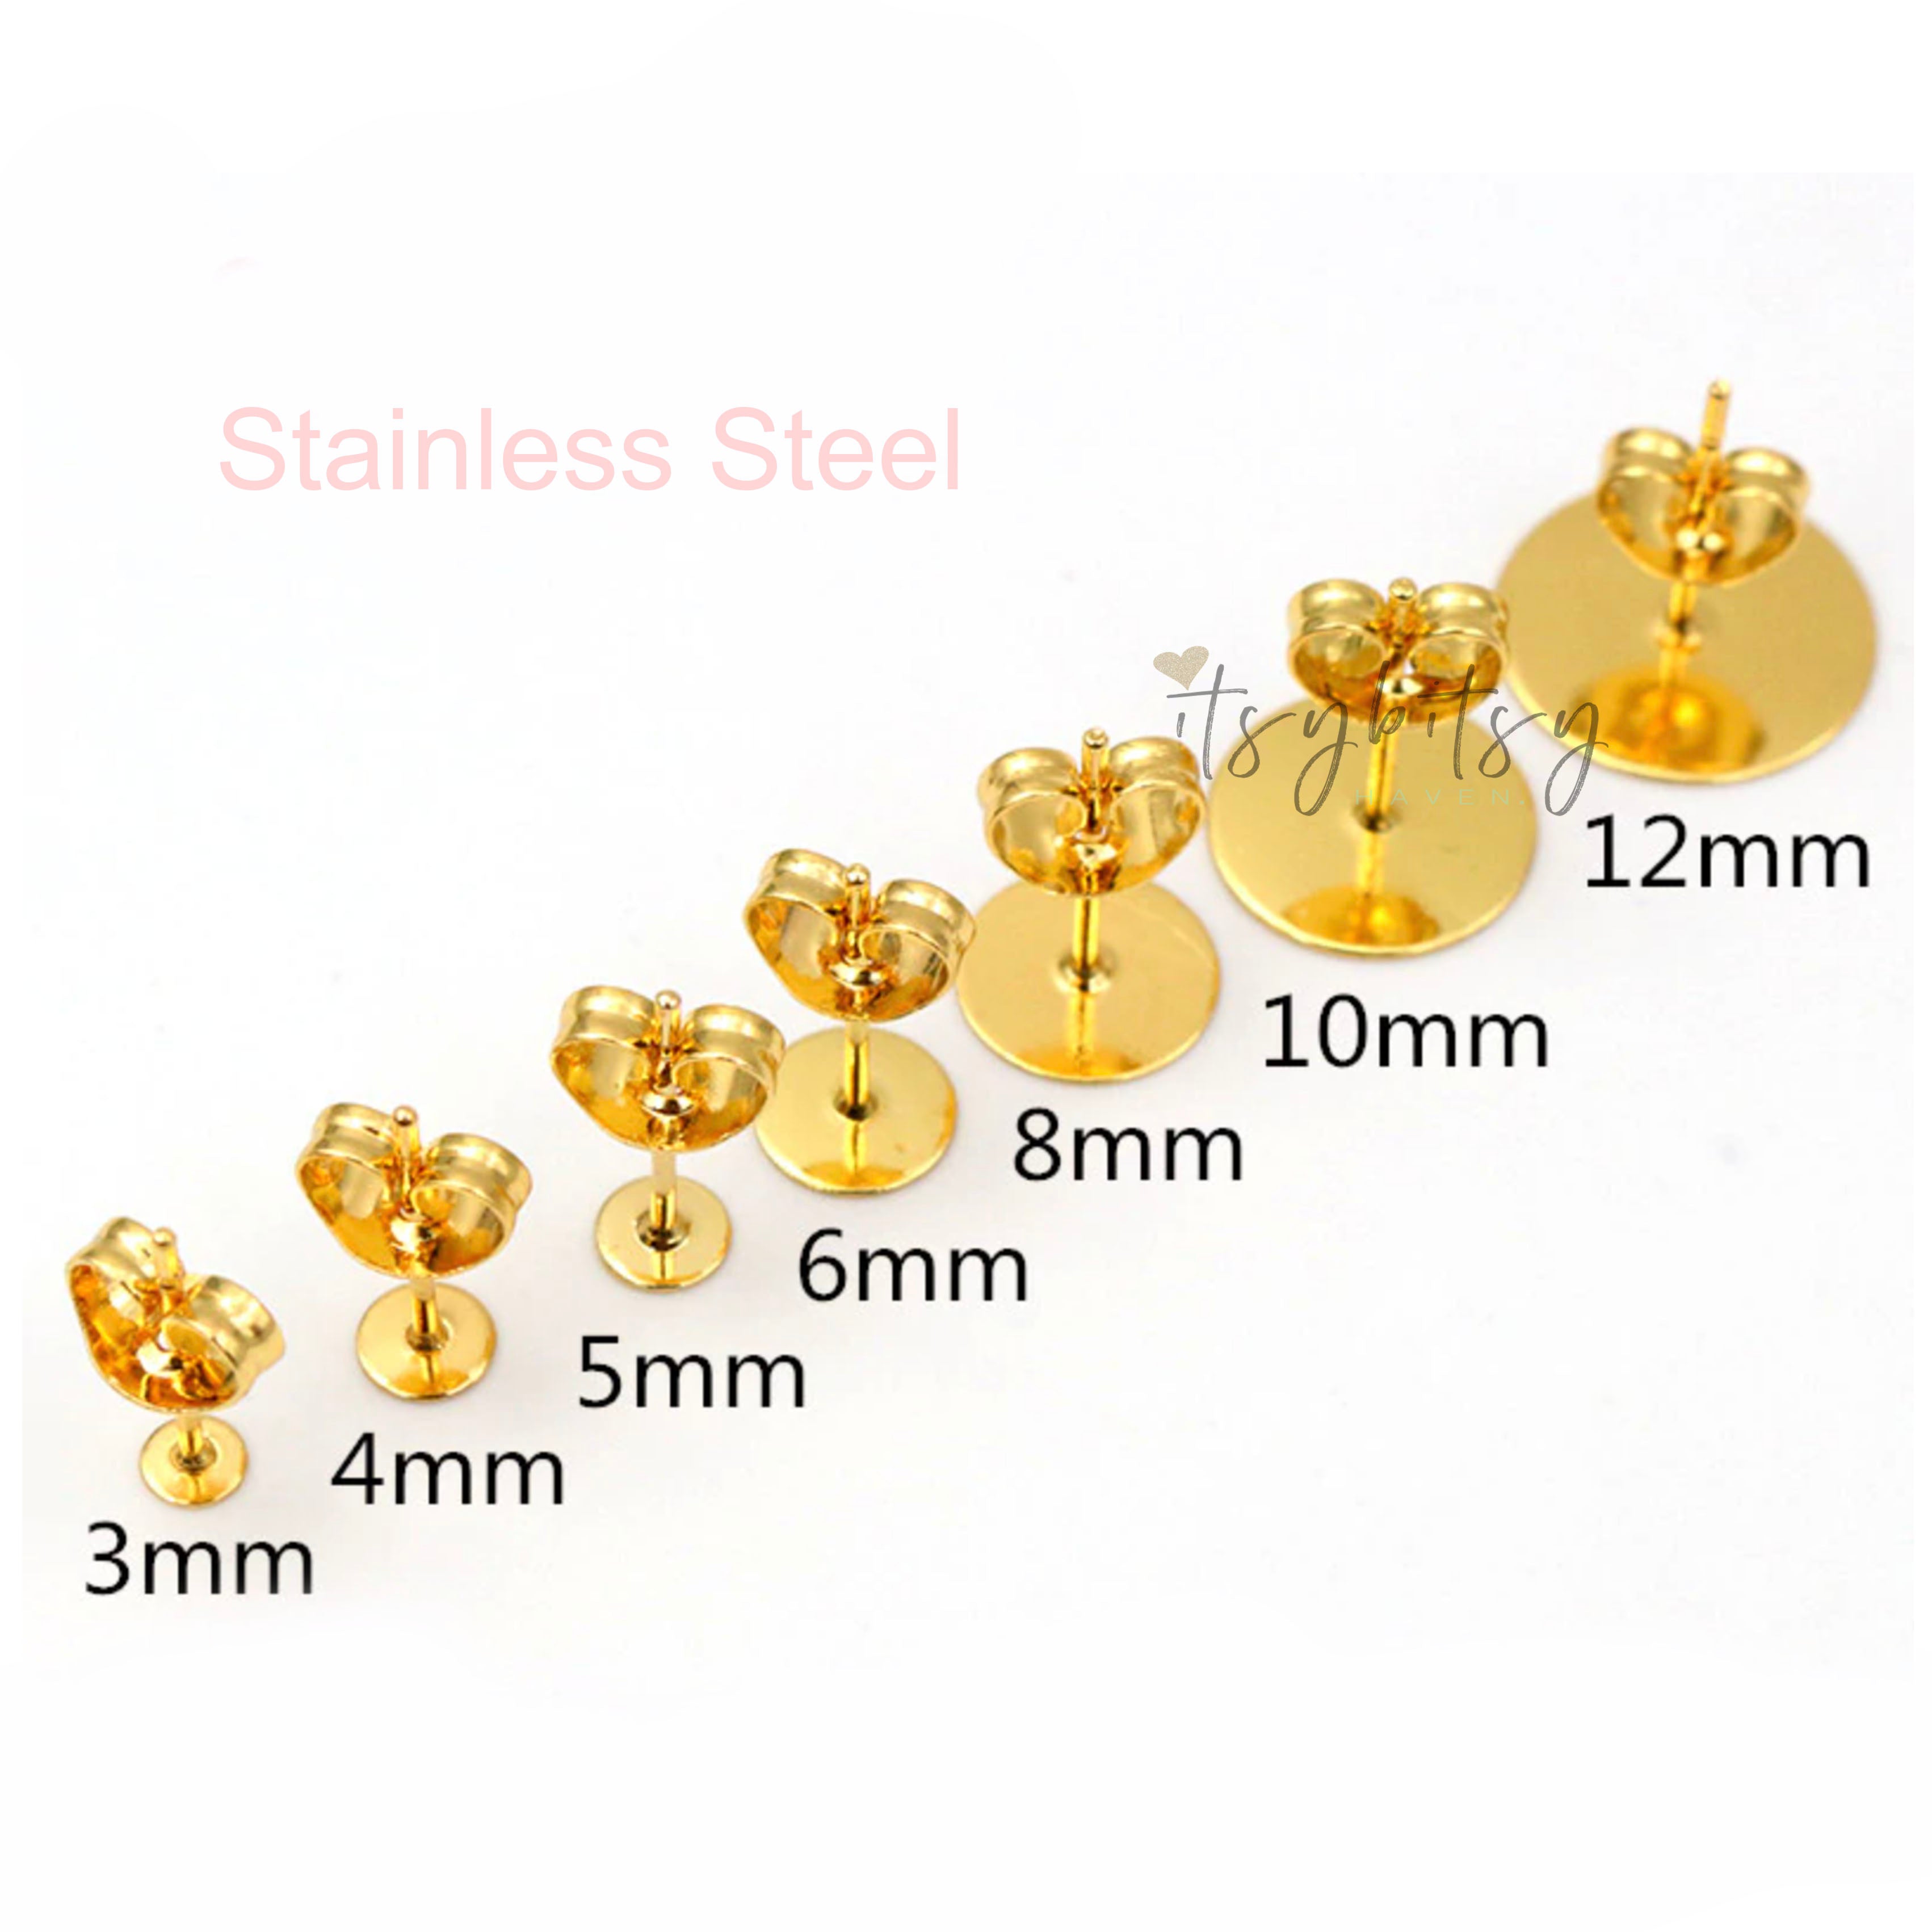 20pcs (10pairs), 3/4/5/6/8/10mm, 316 Stainless Steel / Surgical Grade Steel Flat Round Blank Peg Ear Stud Components with ear backs, in Gold